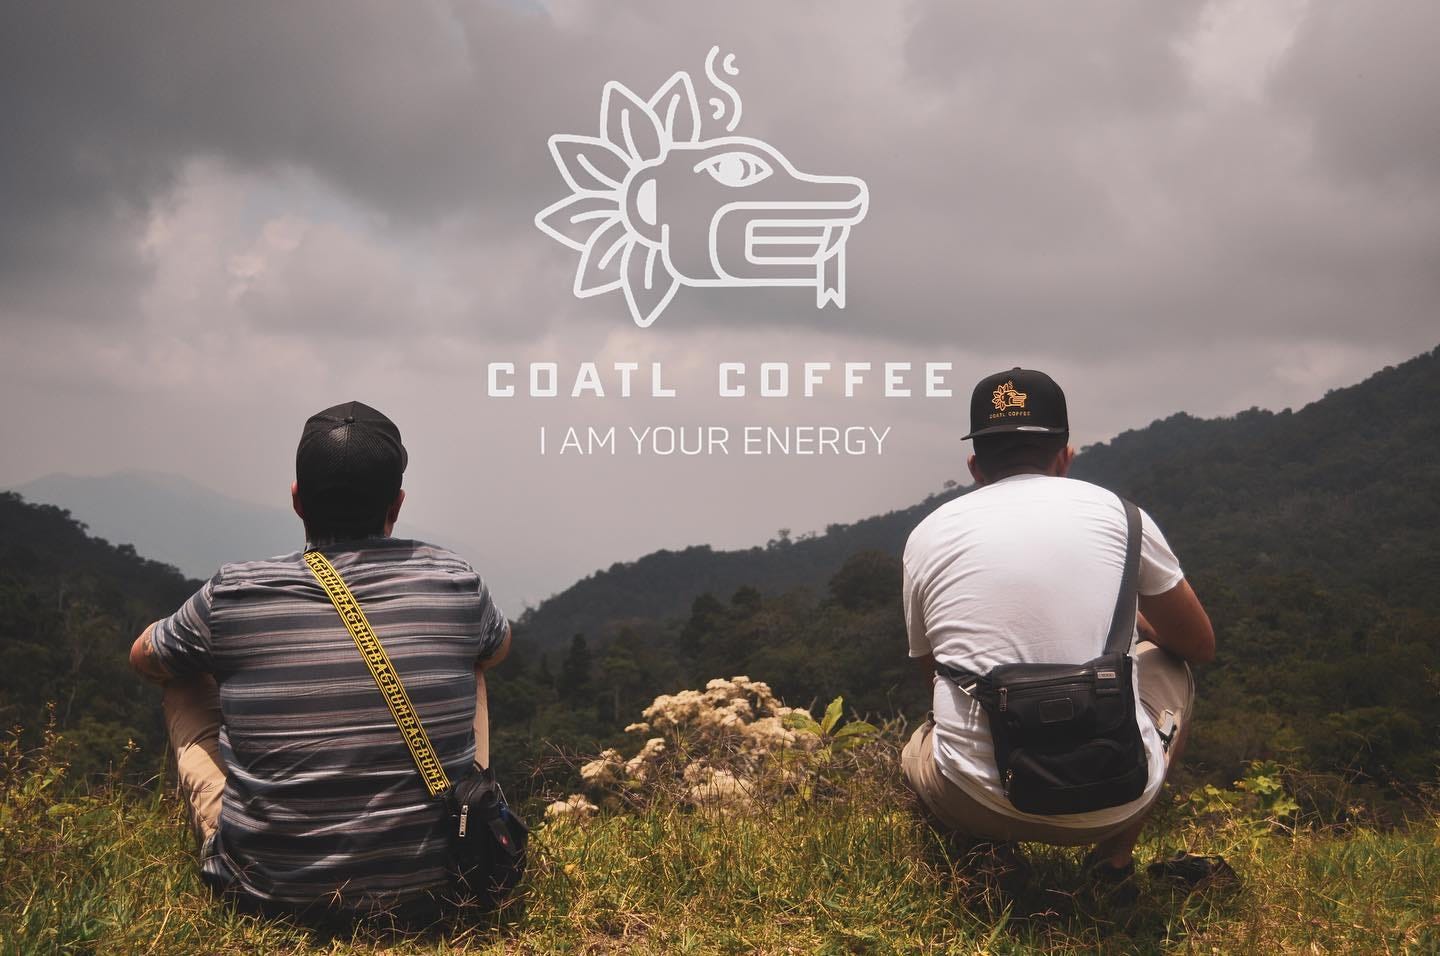 A photo of two men crouching down on a wild, grassy patch looking out over mountain forests under a cloudy sky. The Coatl Coffee logo, a line drawing of a feathered serpent head based on Aztec myth along with the phrase "I am your energy" is imposed over the clouds.